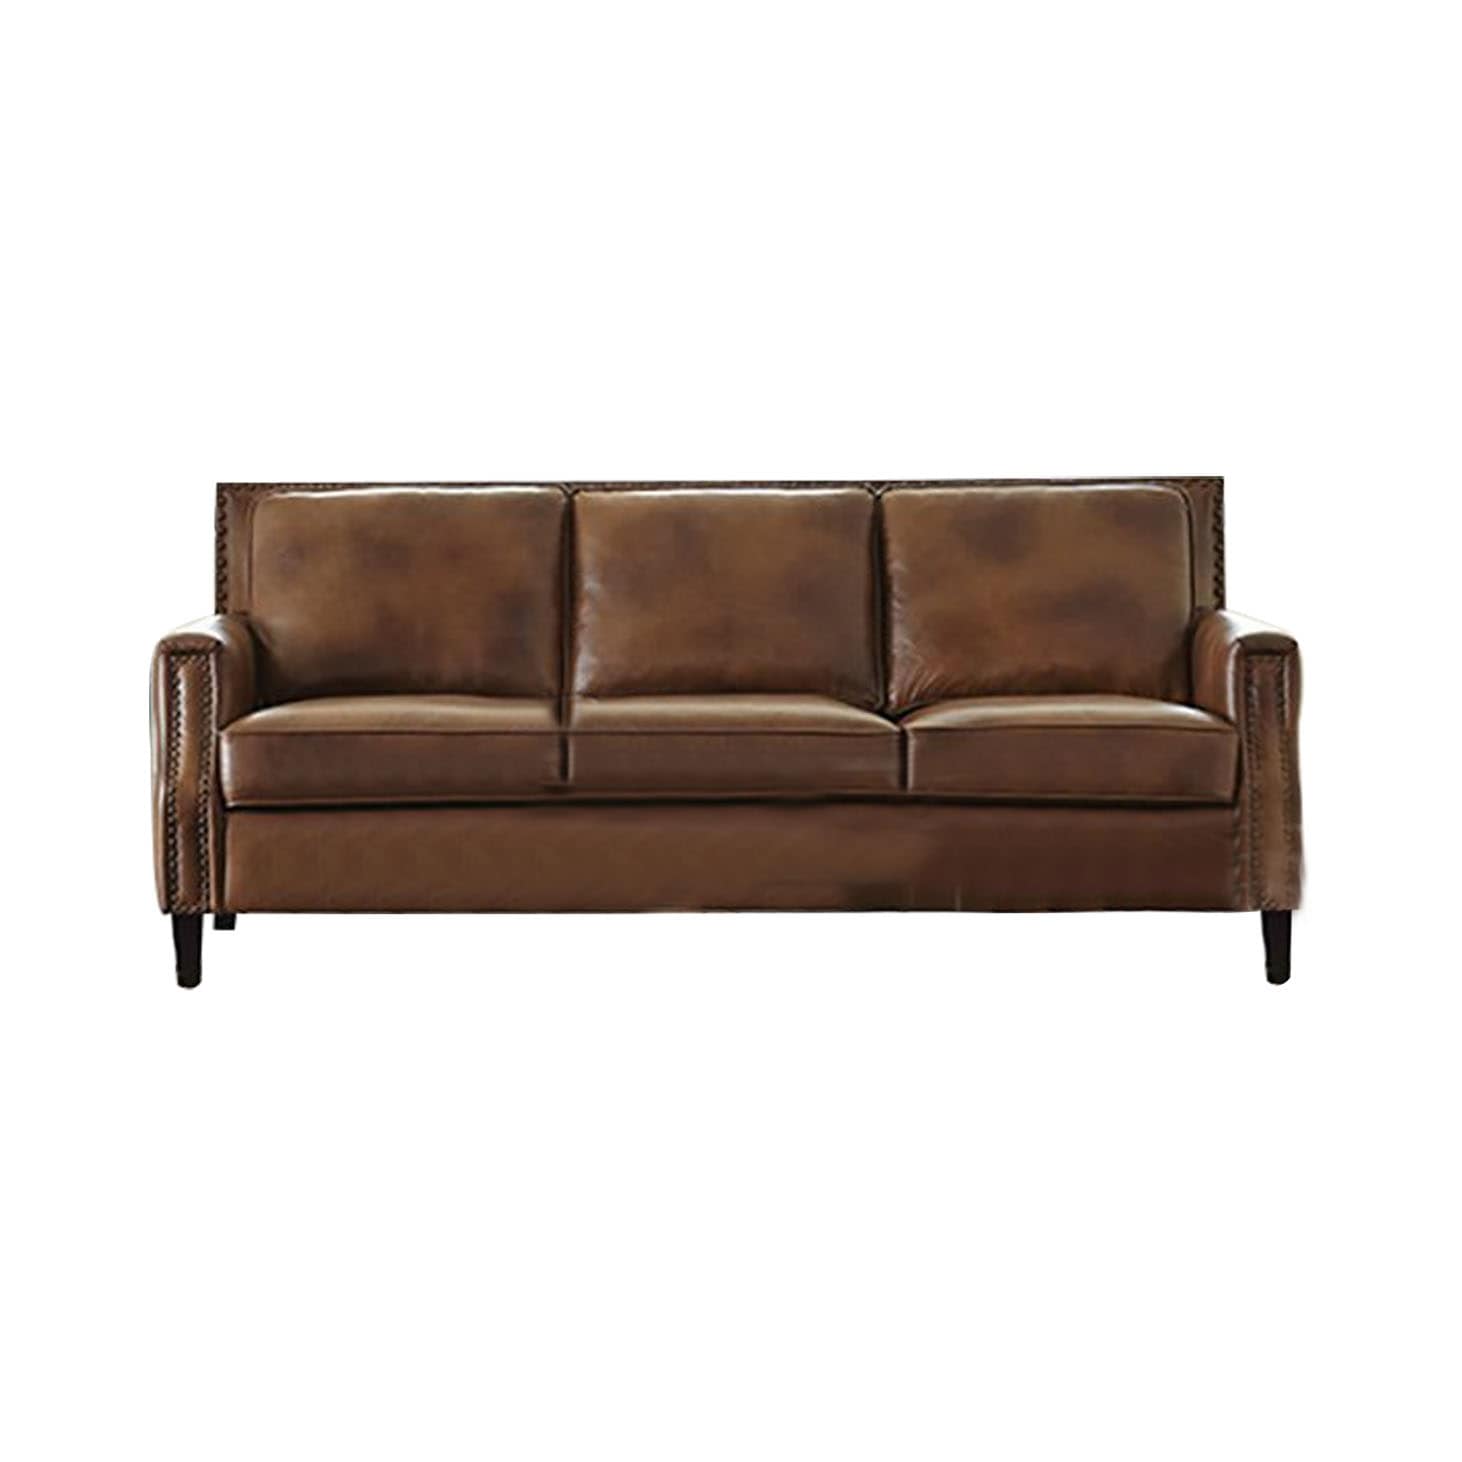 Simple Relax Upholstered Sofa in Brown Sugar and Espresso